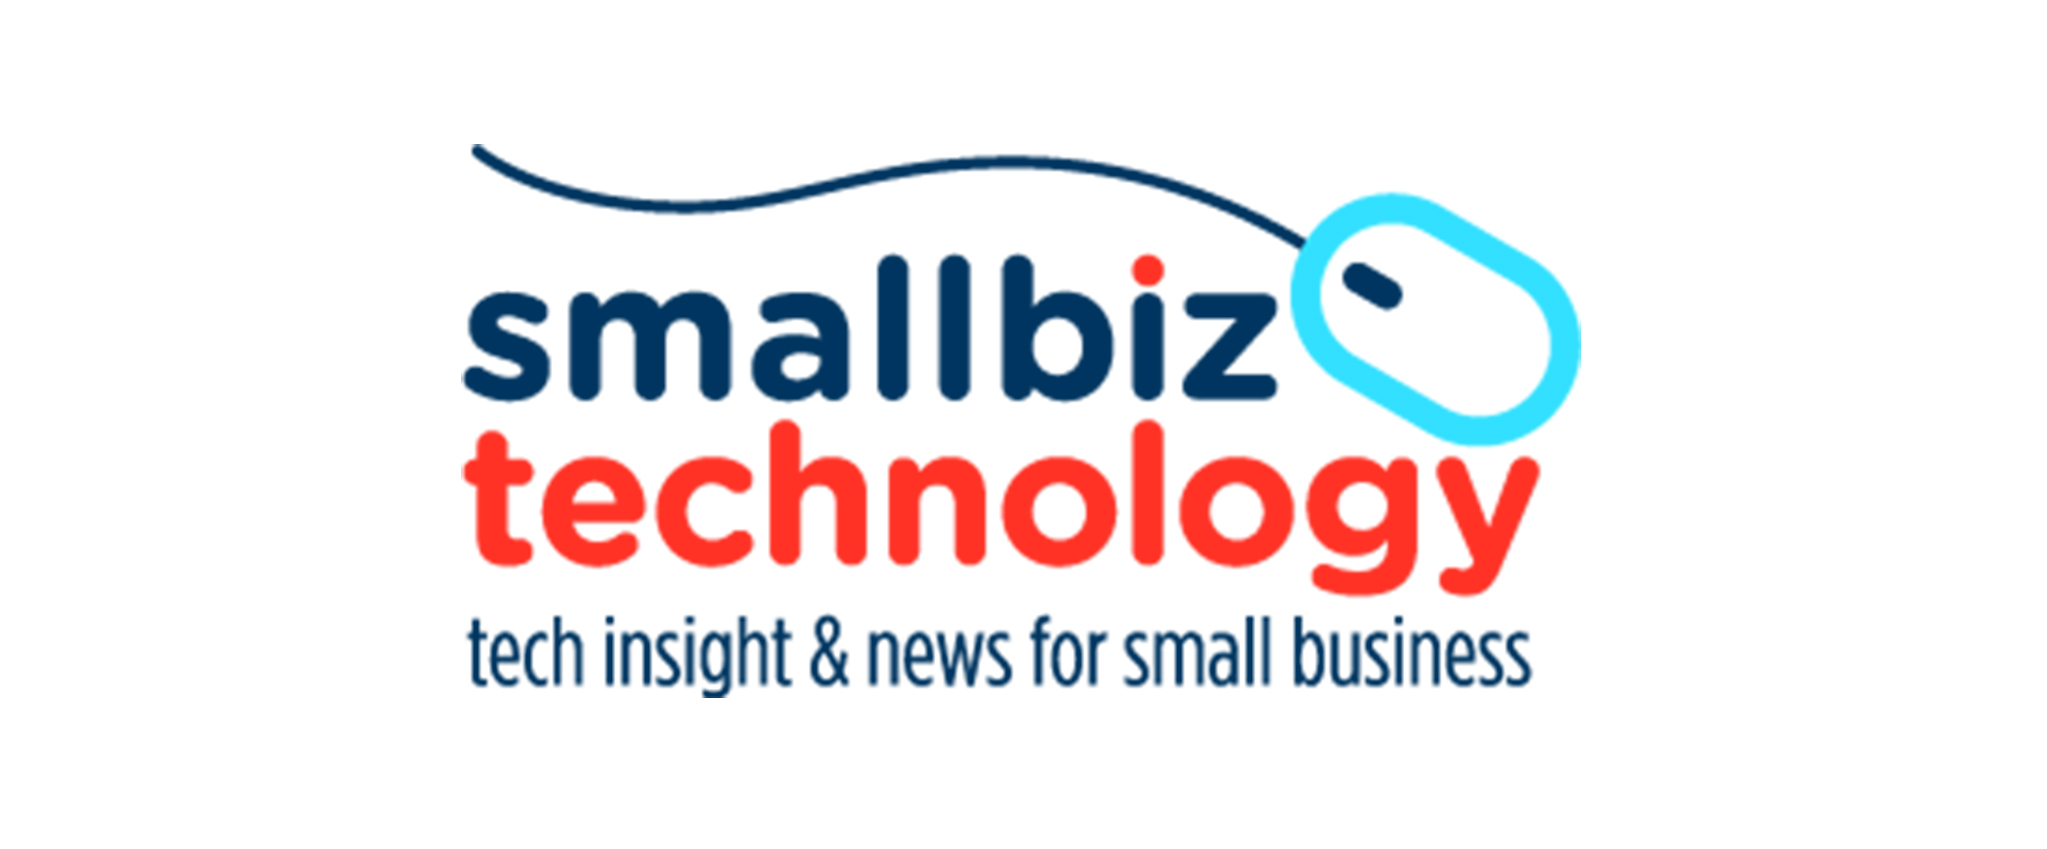 Tech insight and news for small business